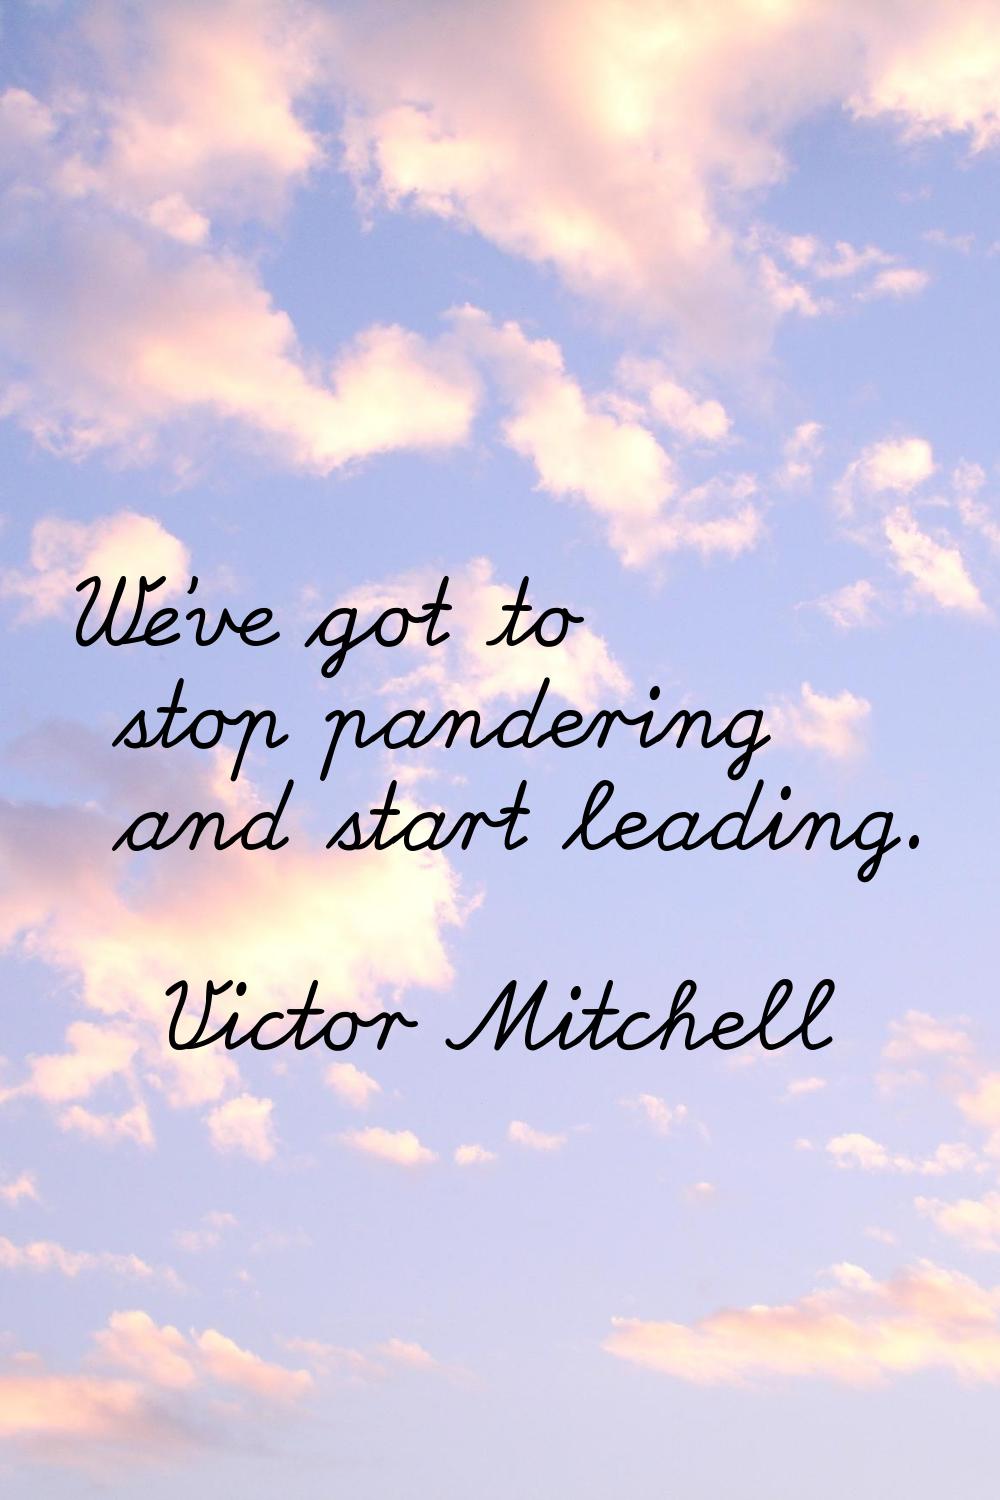 We've got to stop pandering and start leading.